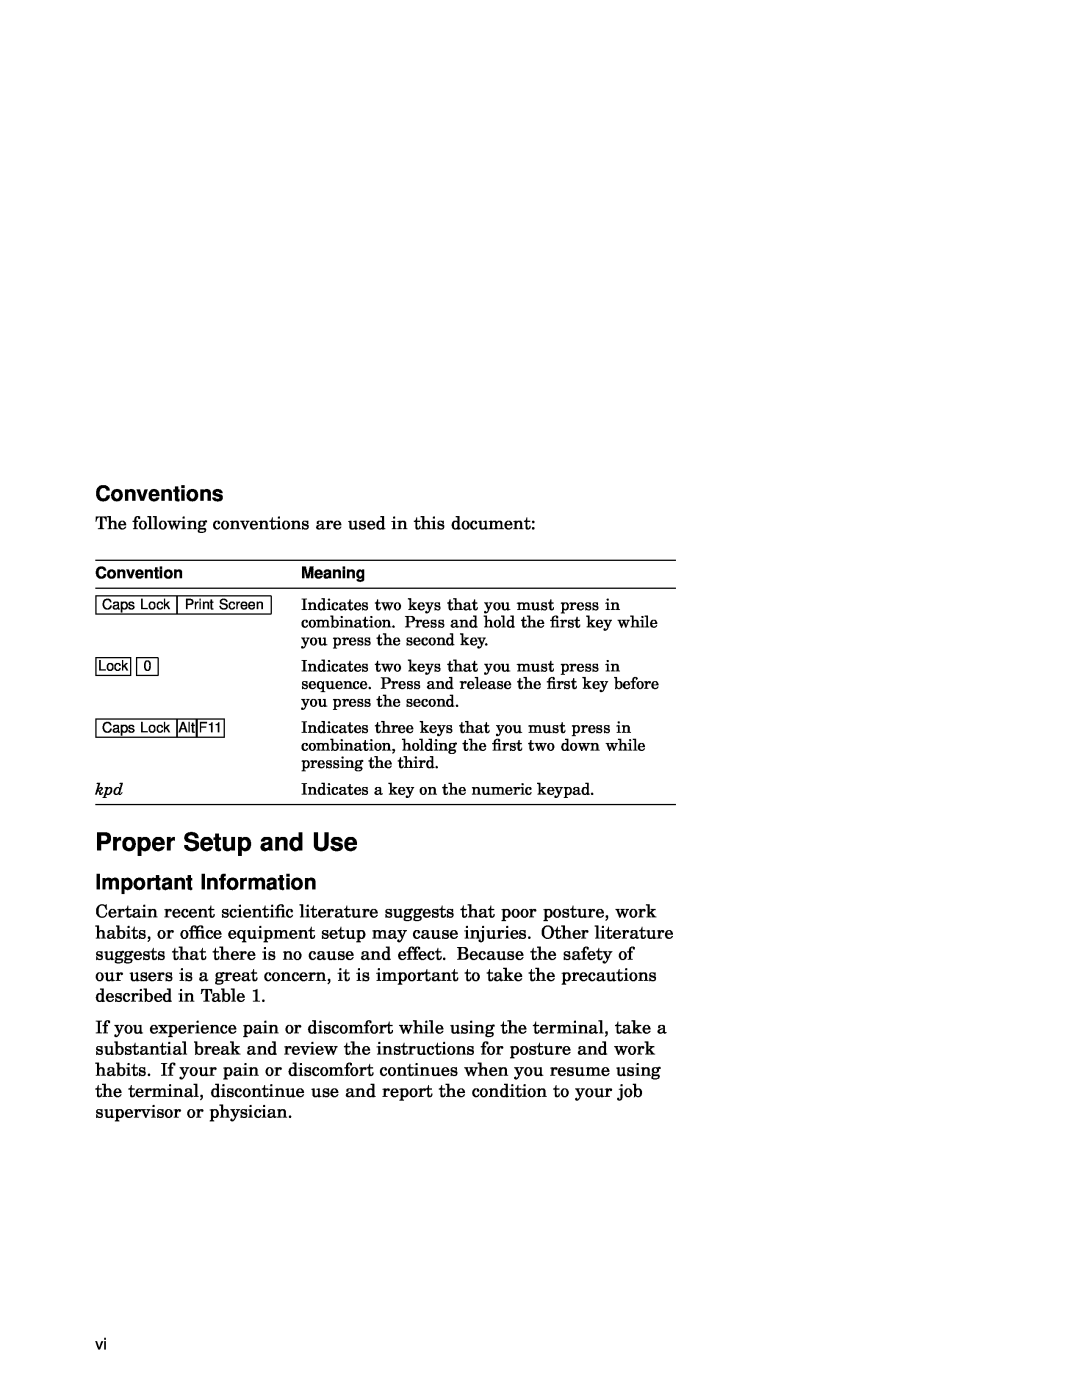 IBM WS525 manual Proper Setup and Use, Conventions, Important Information 